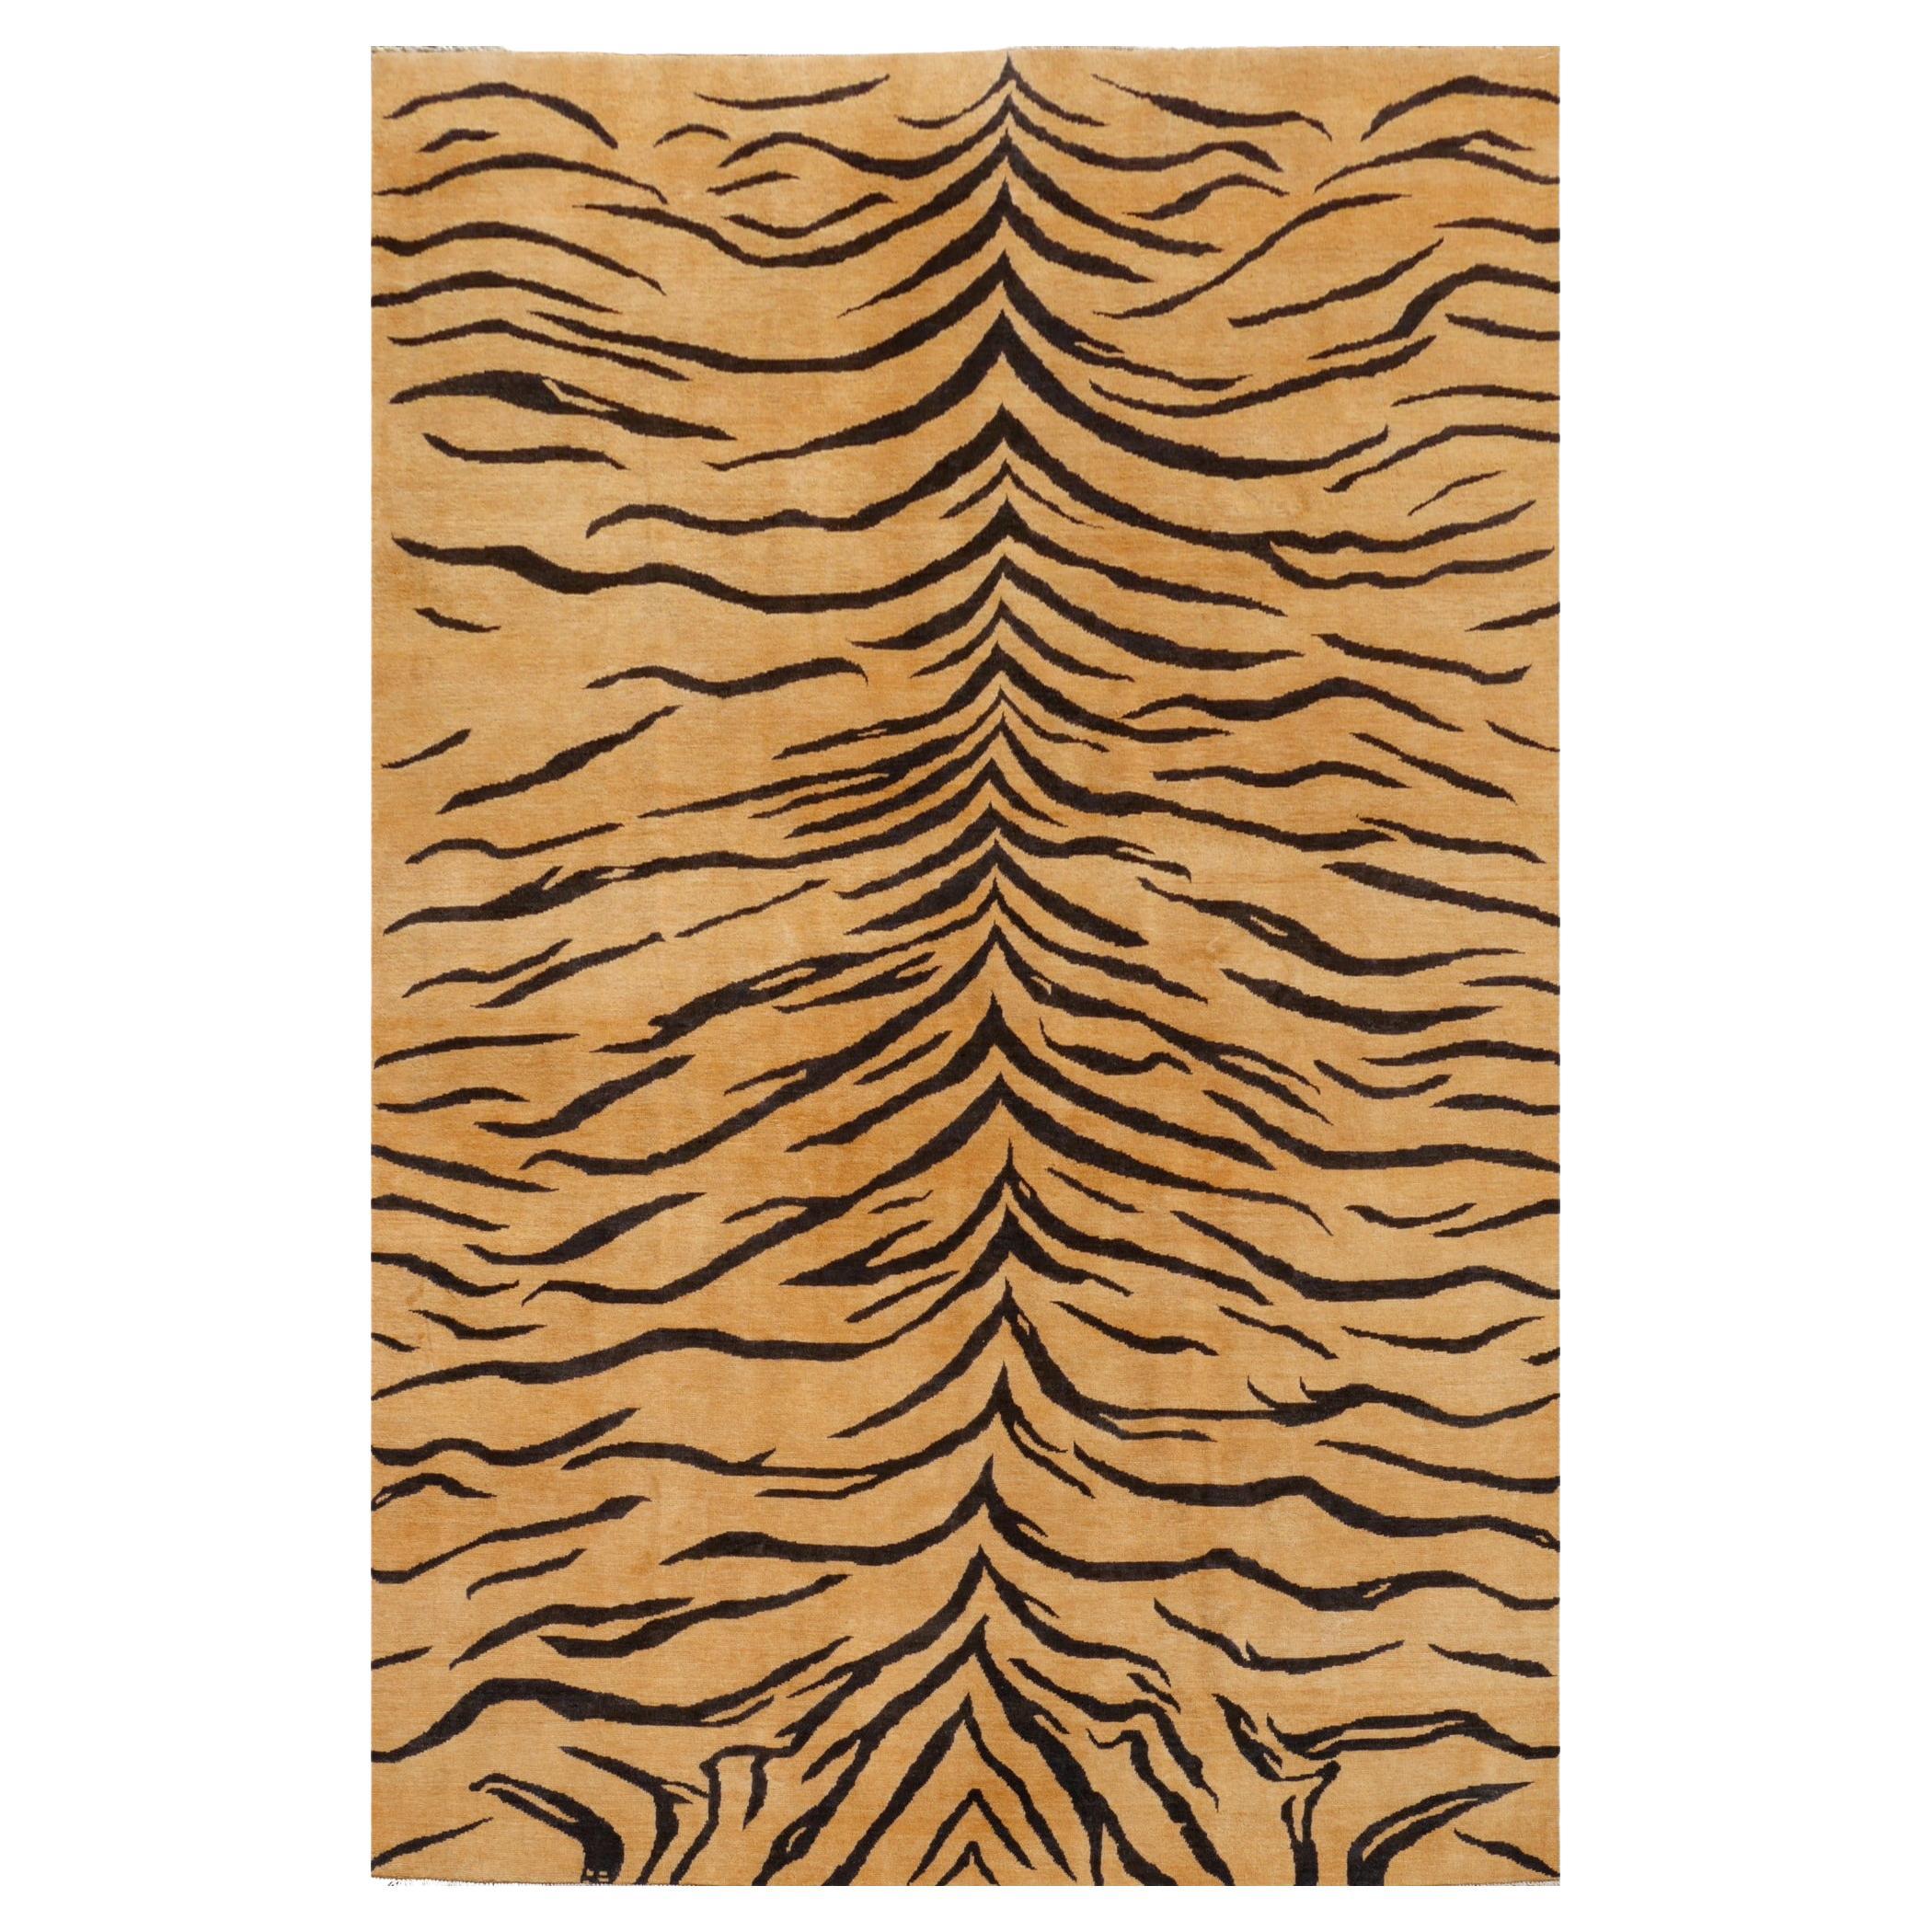 Large Tiger Rug Wool Hand Knotted Art Deco Design by Djoharian Collection For Sale